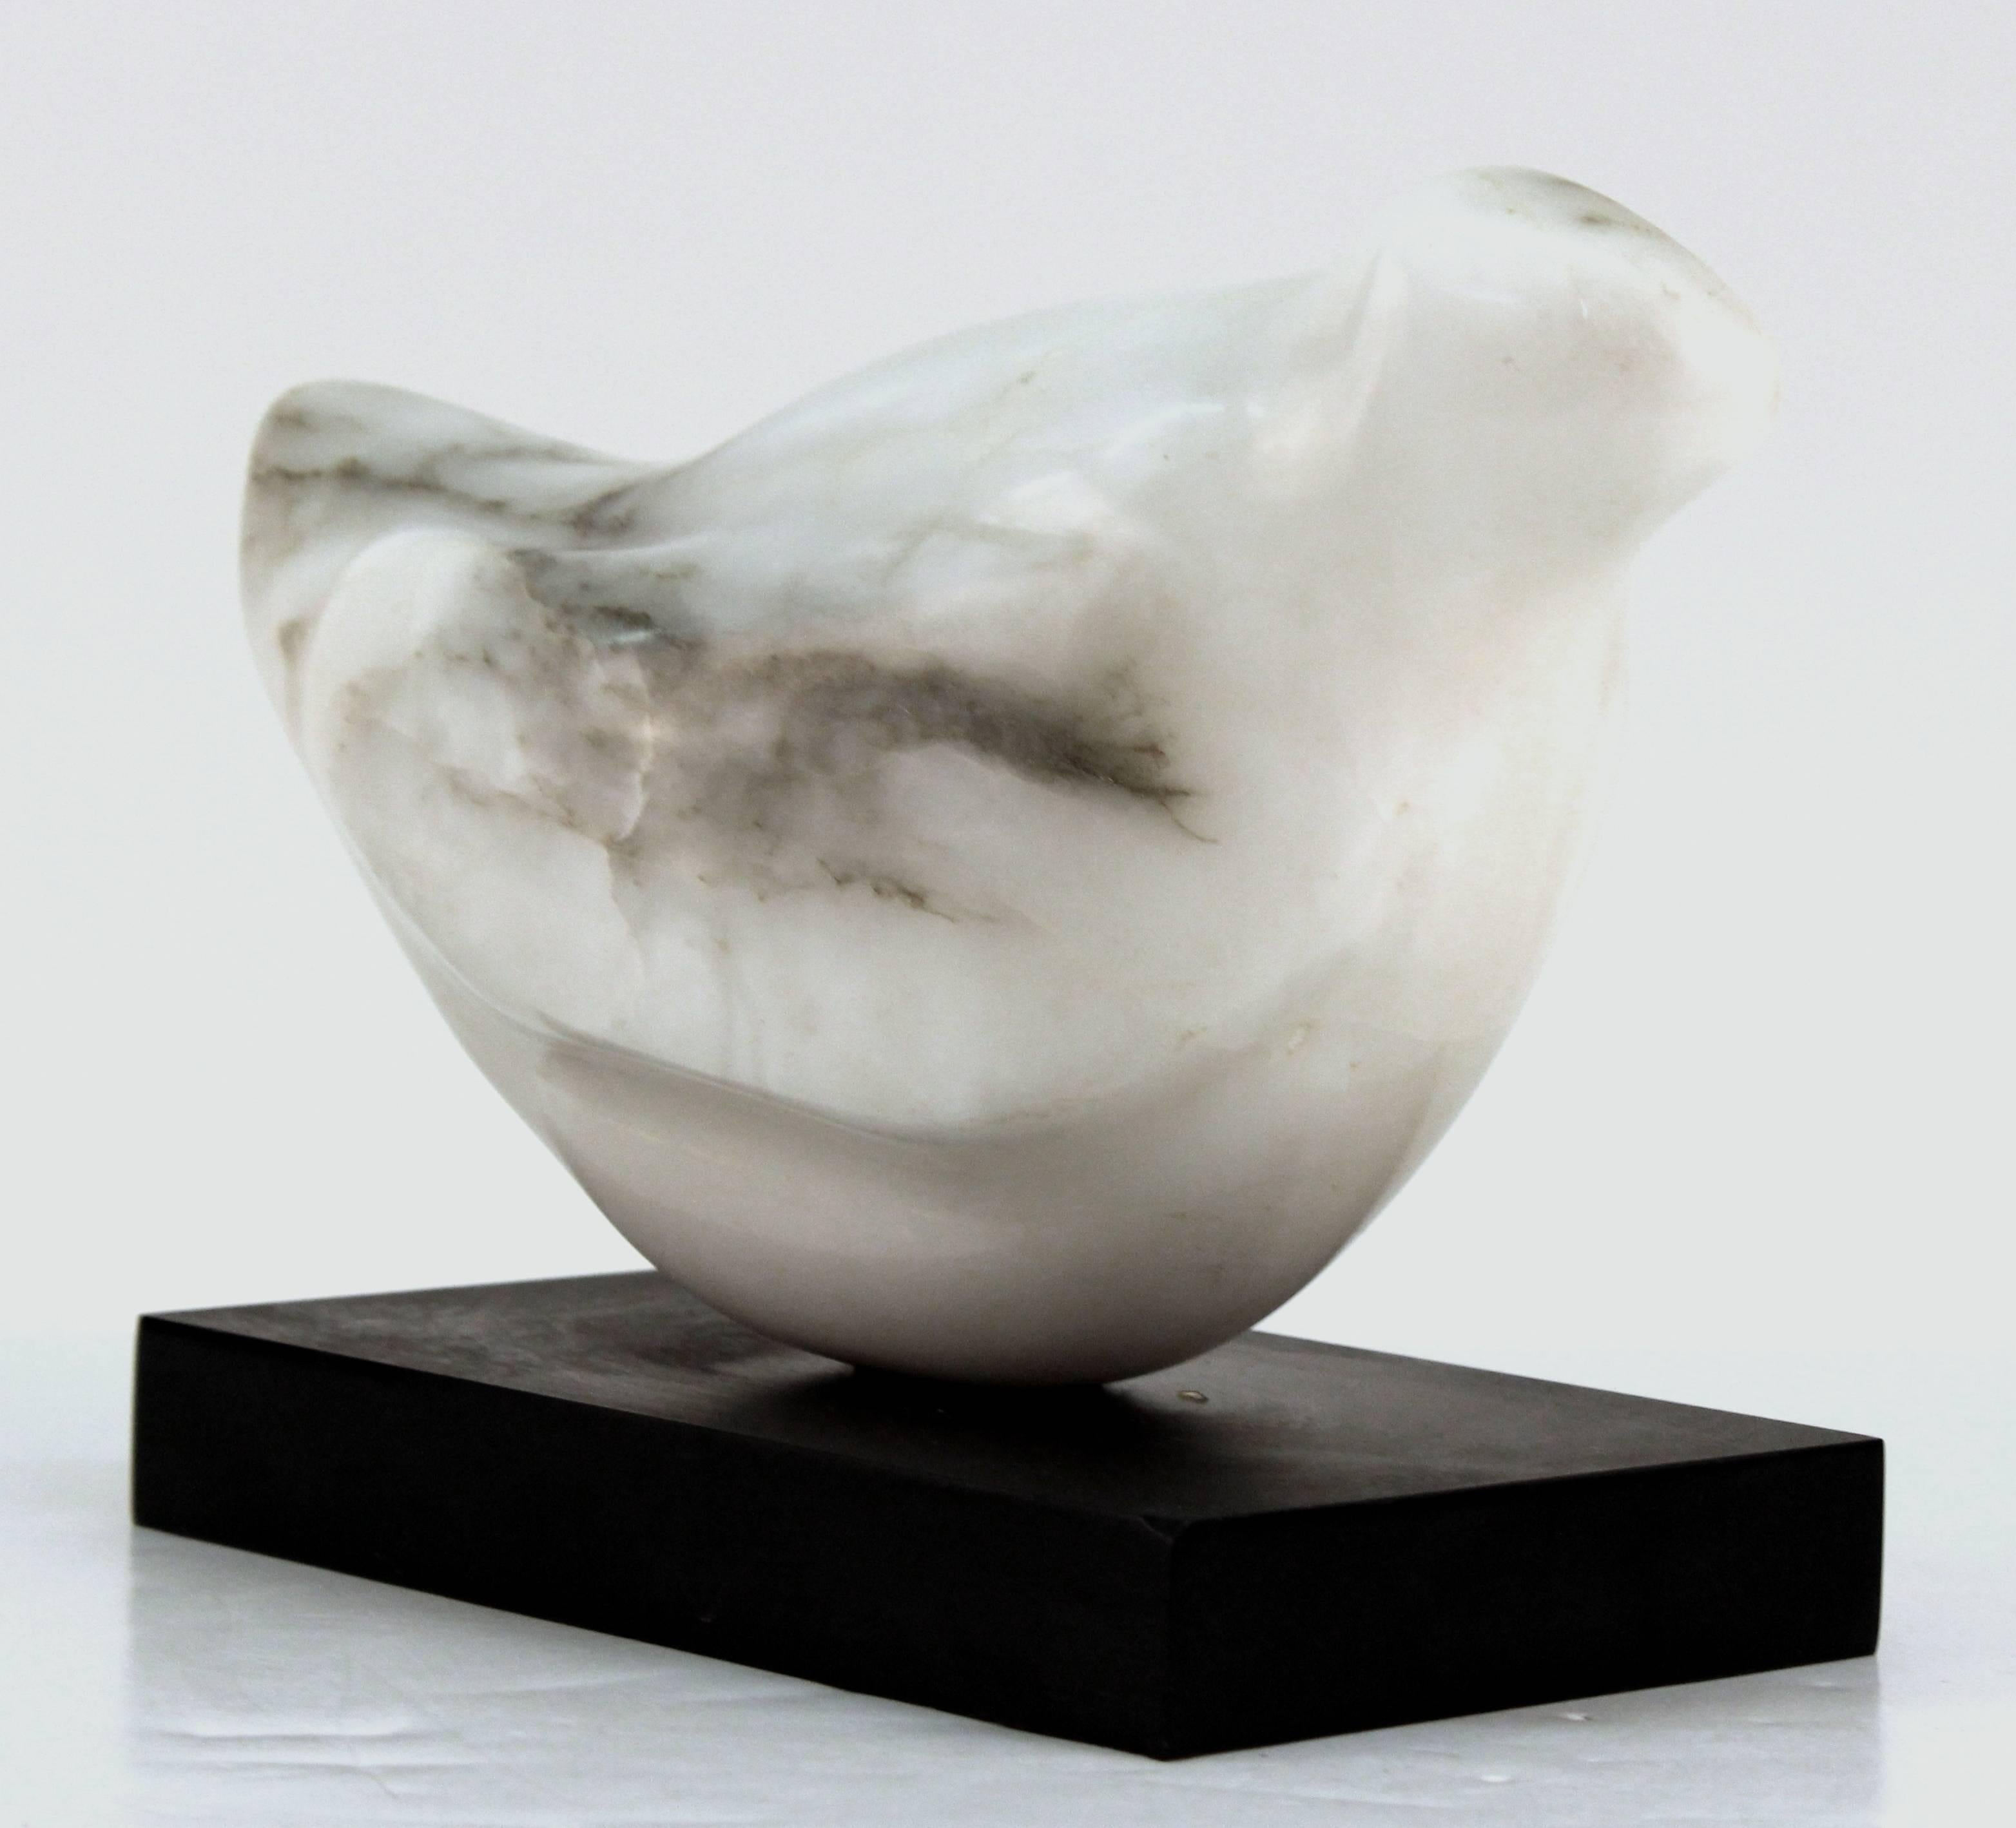 Modernist bird sculpture carved out of smooth white marble with black veins. The bird is in a seated position and rests on a black base. There is some scratching to the bottom of the base and the sculpture is in good vintage condition consistent